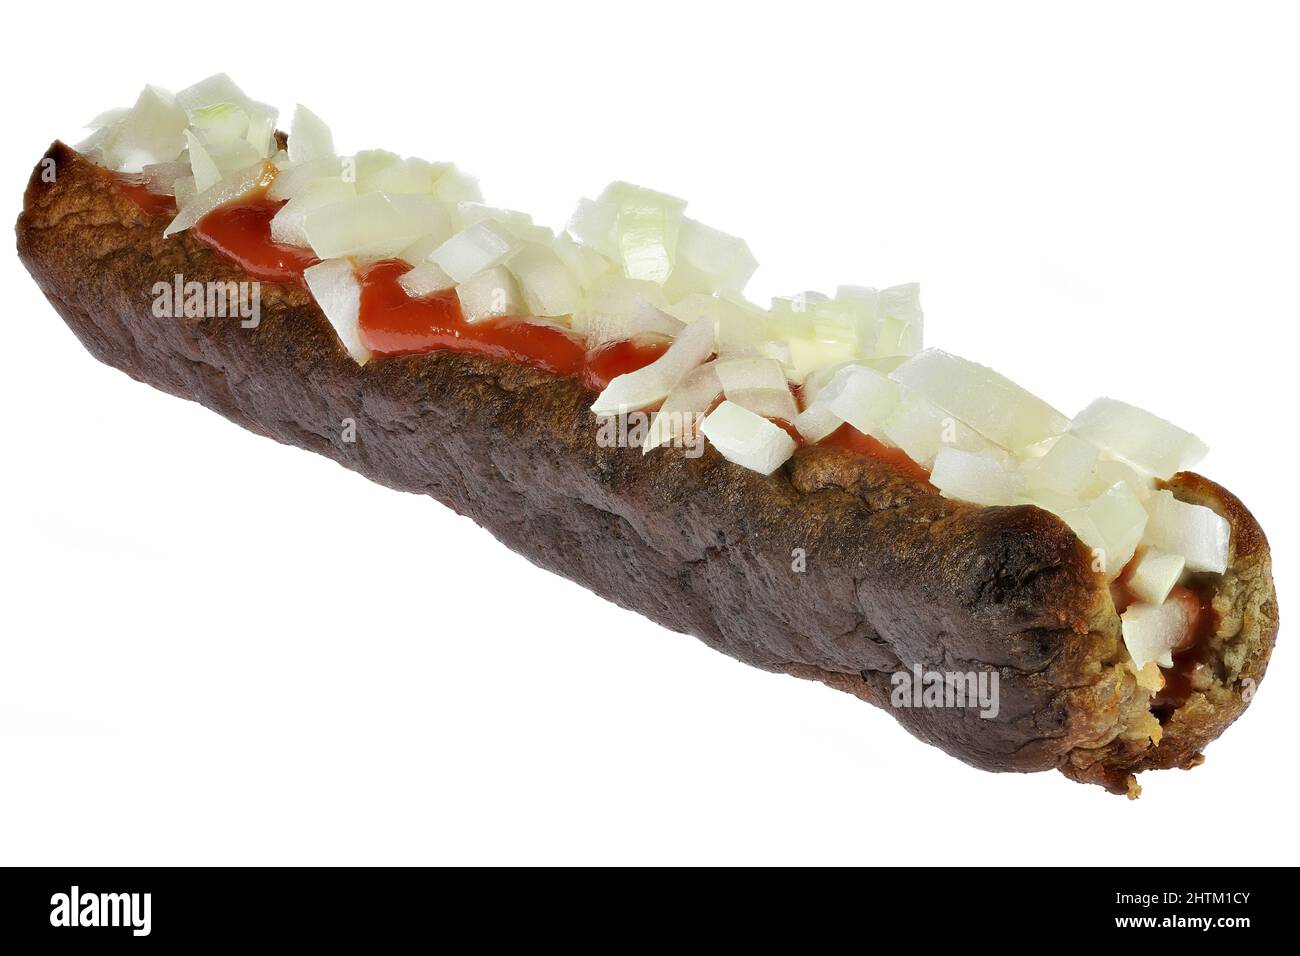 Dutch frikandel speciaal isolated on white background Stock Photo